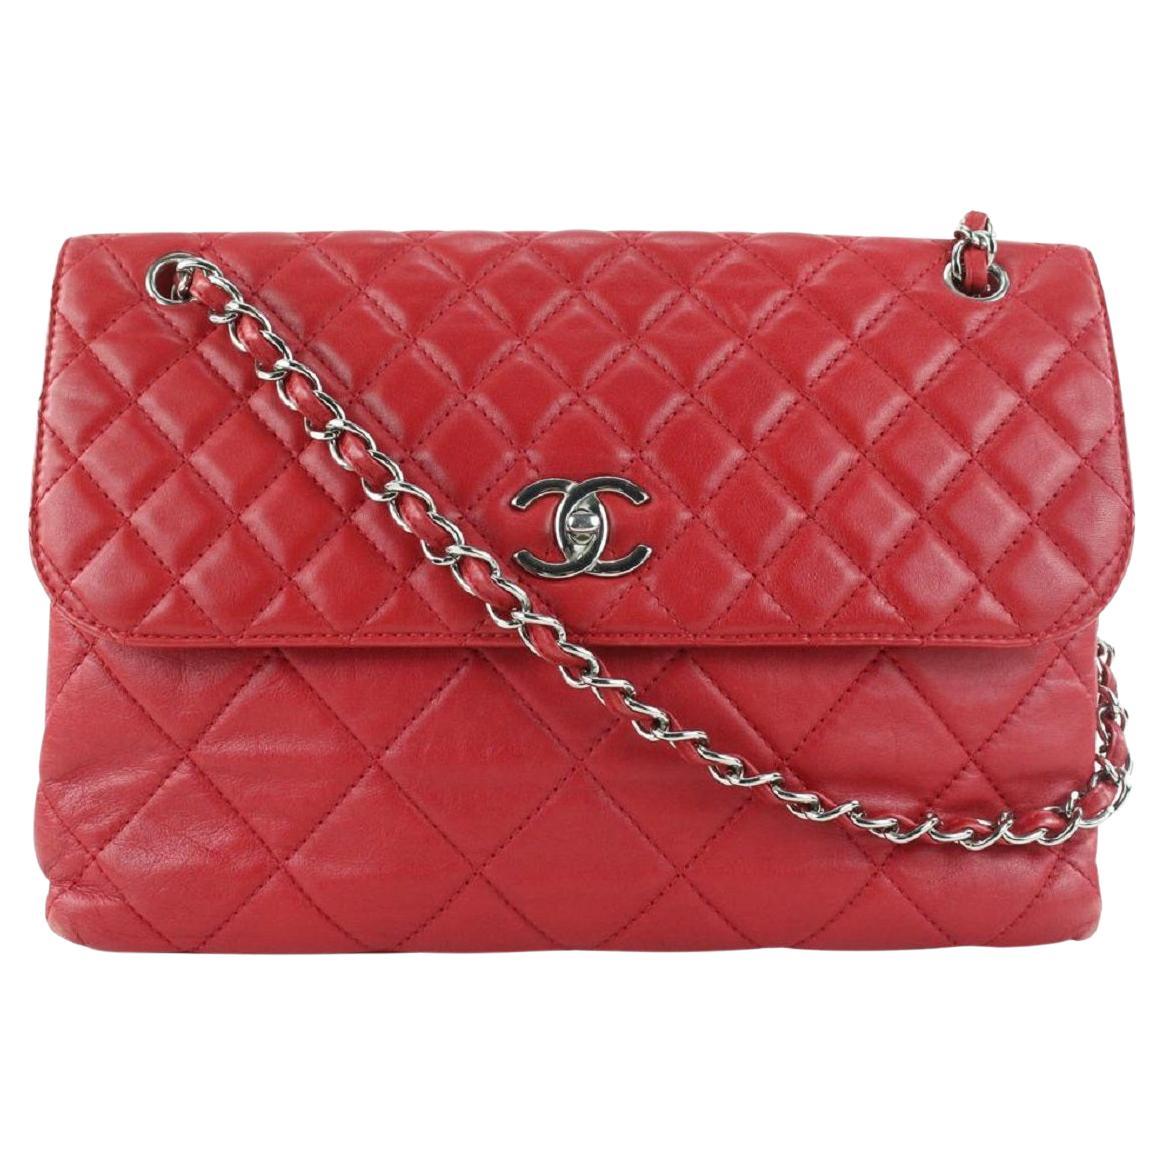 Chanel Red Quilted Lambskin Jumbo Flap Silver Chain Bag 413cas528